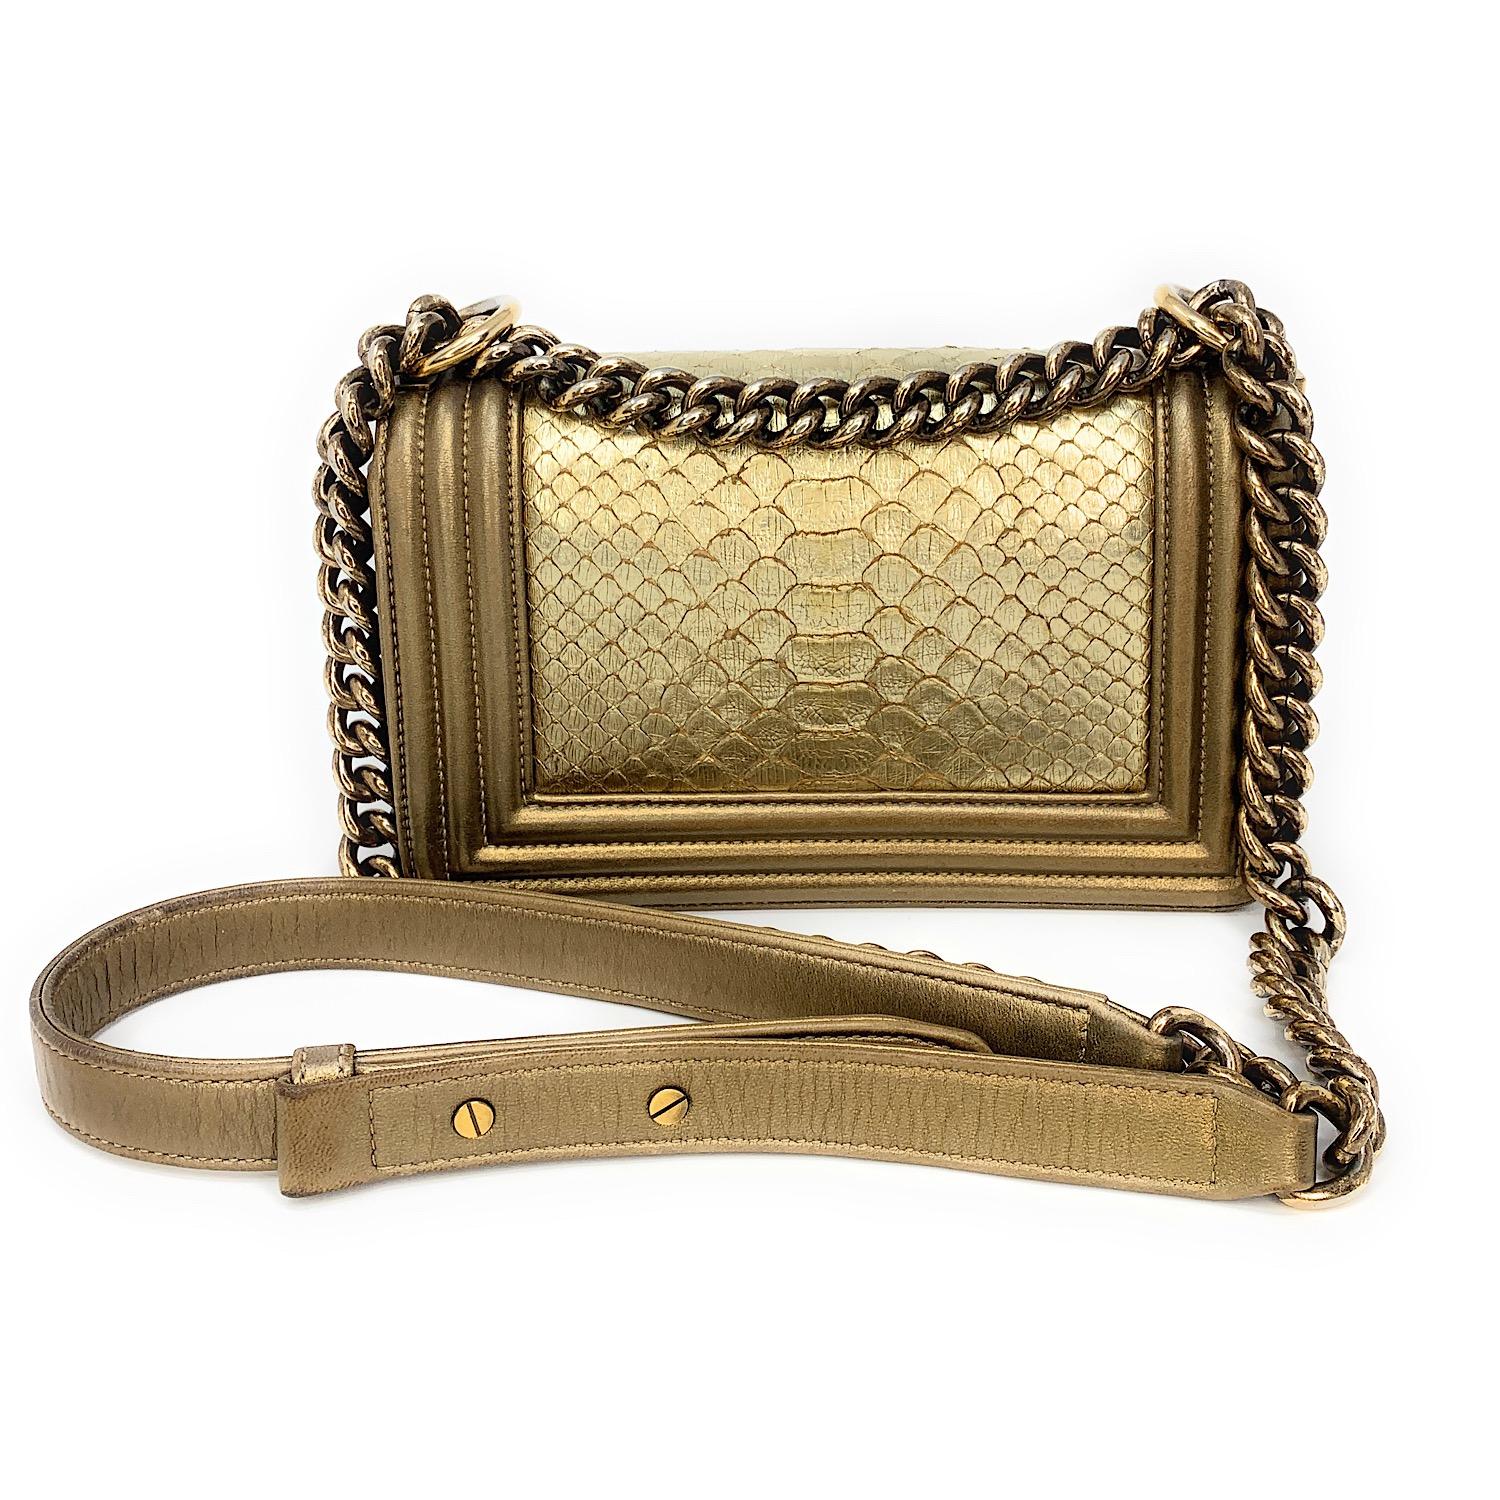 Up for sale; Chanel Metallic Gold Python Small Boy Small Flap Bag with brushed gold-tone hardware, single chain-link and leather shoulder strap, python panel at center exterior, tonal leather lining, single slit pocket at interior wall and push-lock